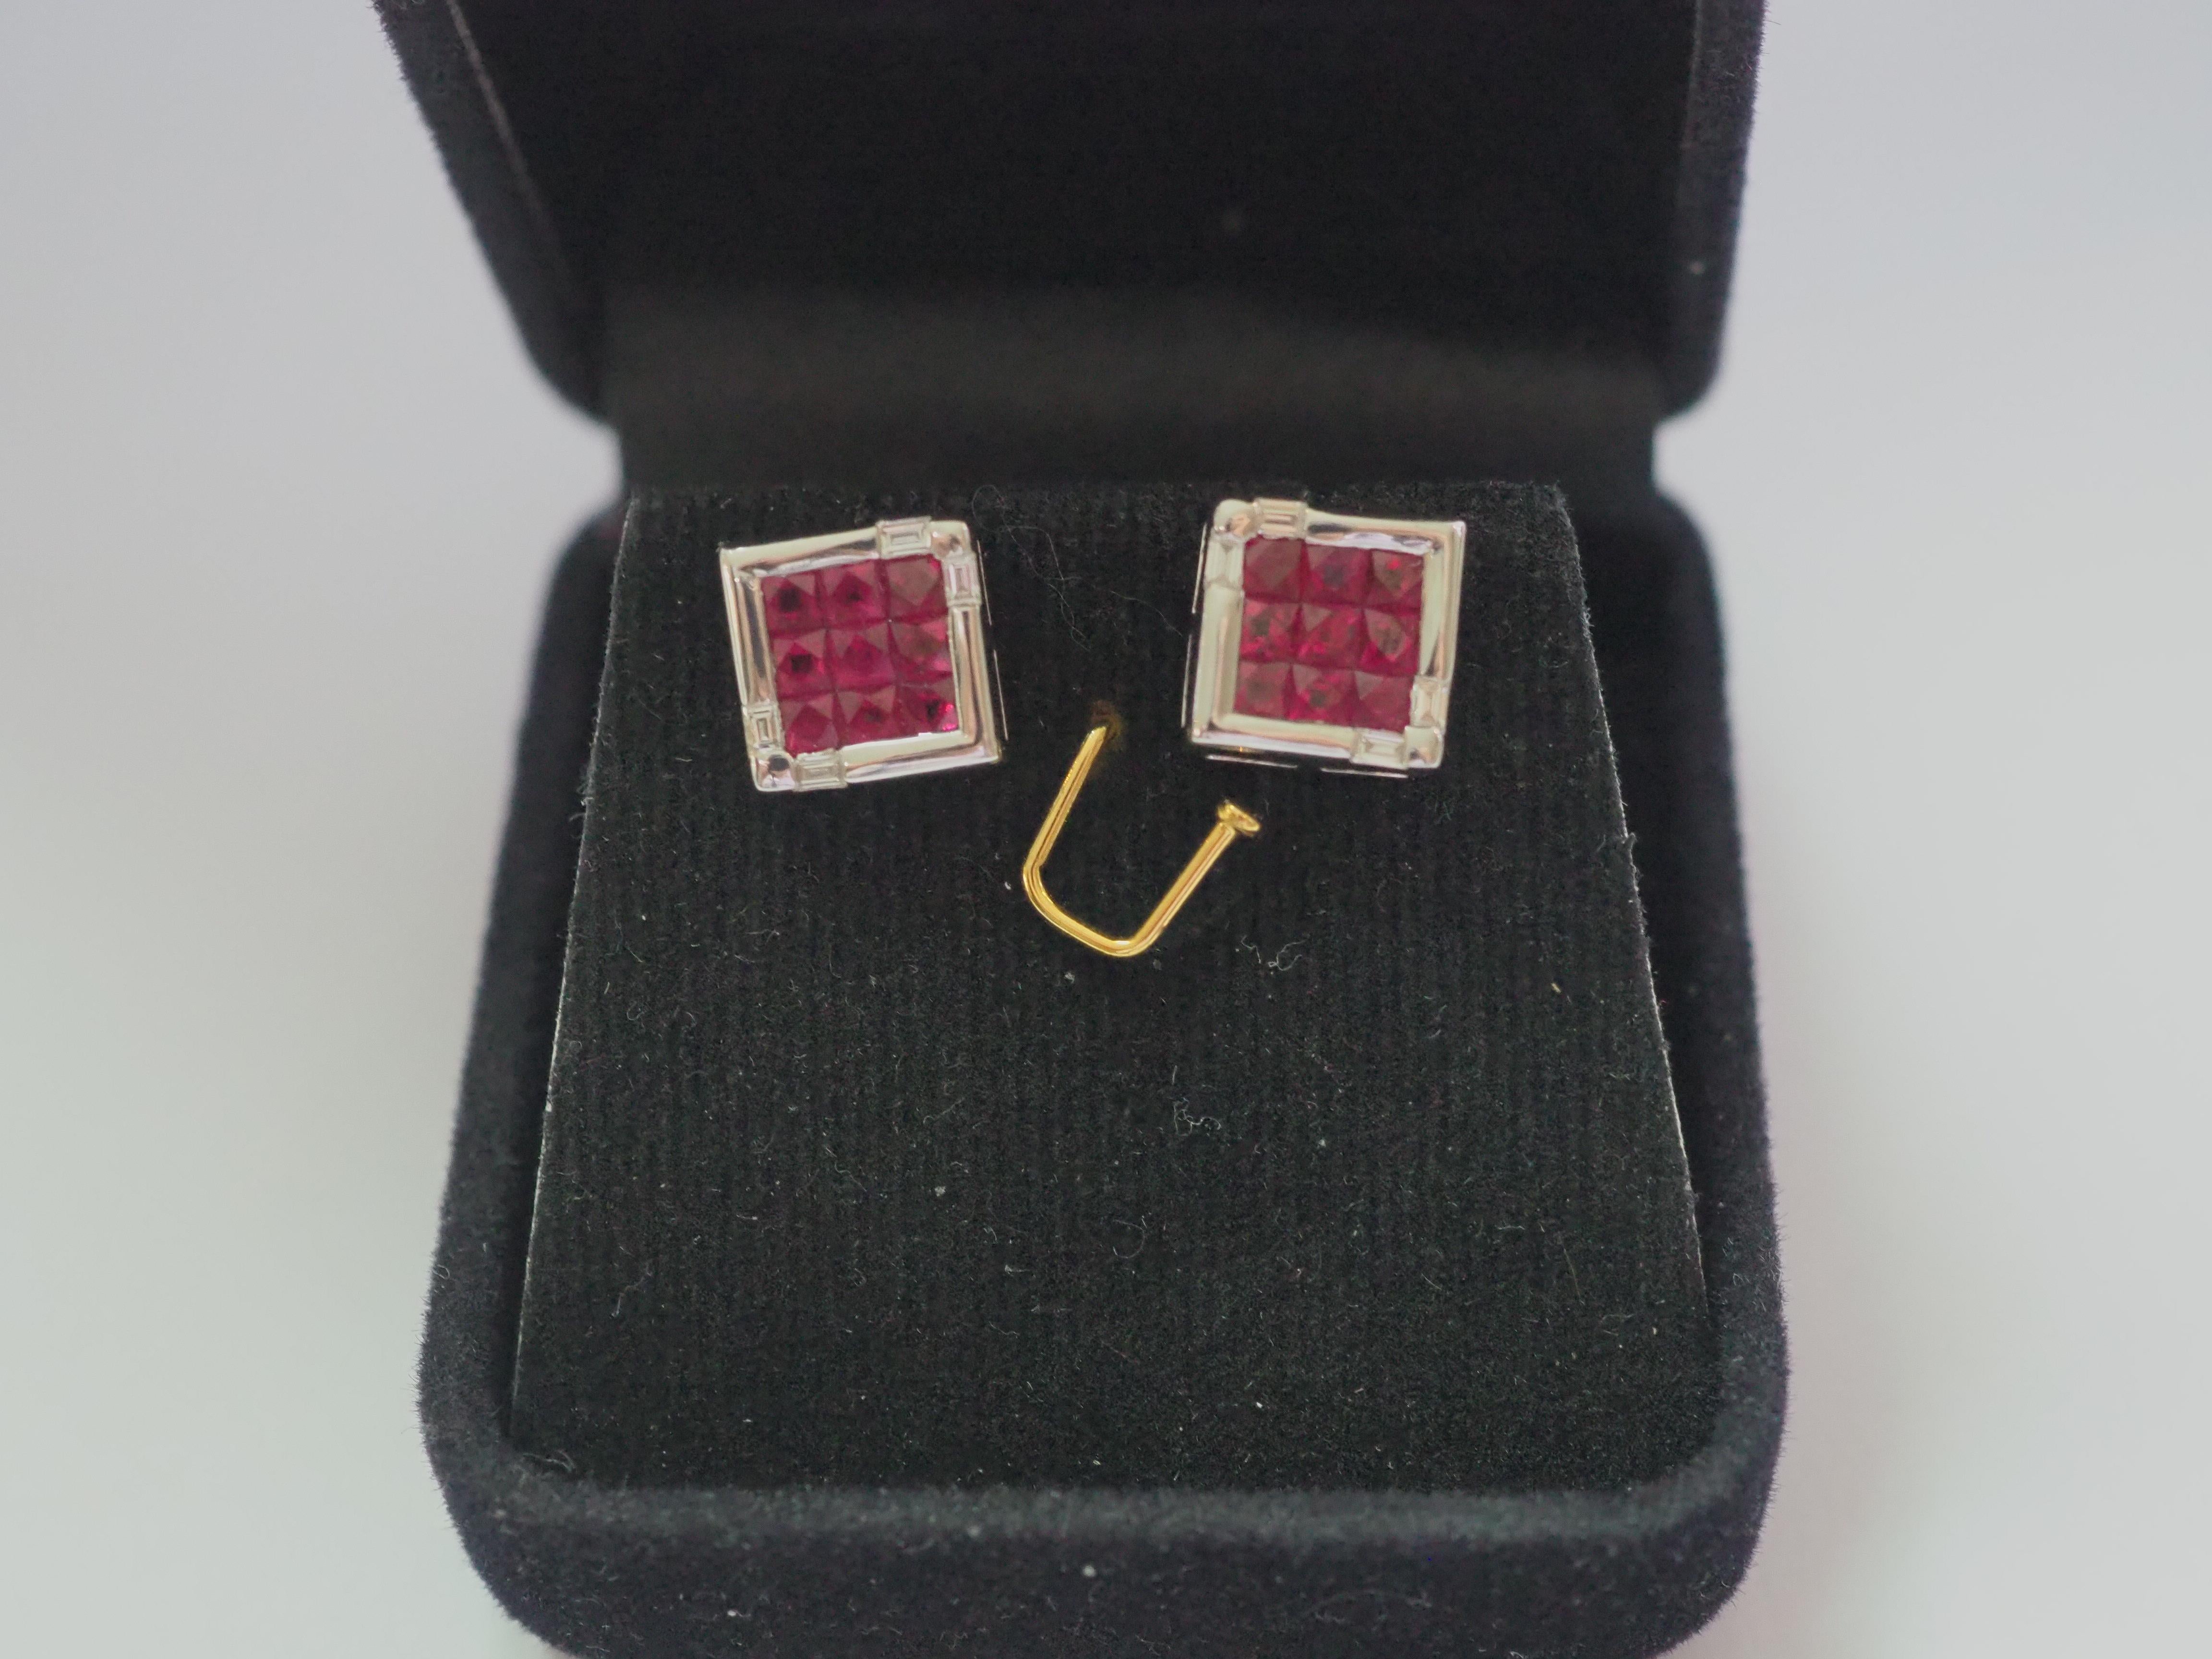 18k White Gold 2.21ct Square Ruby & 0.18ct Baguette Diamond Stud Earring For Sale 3